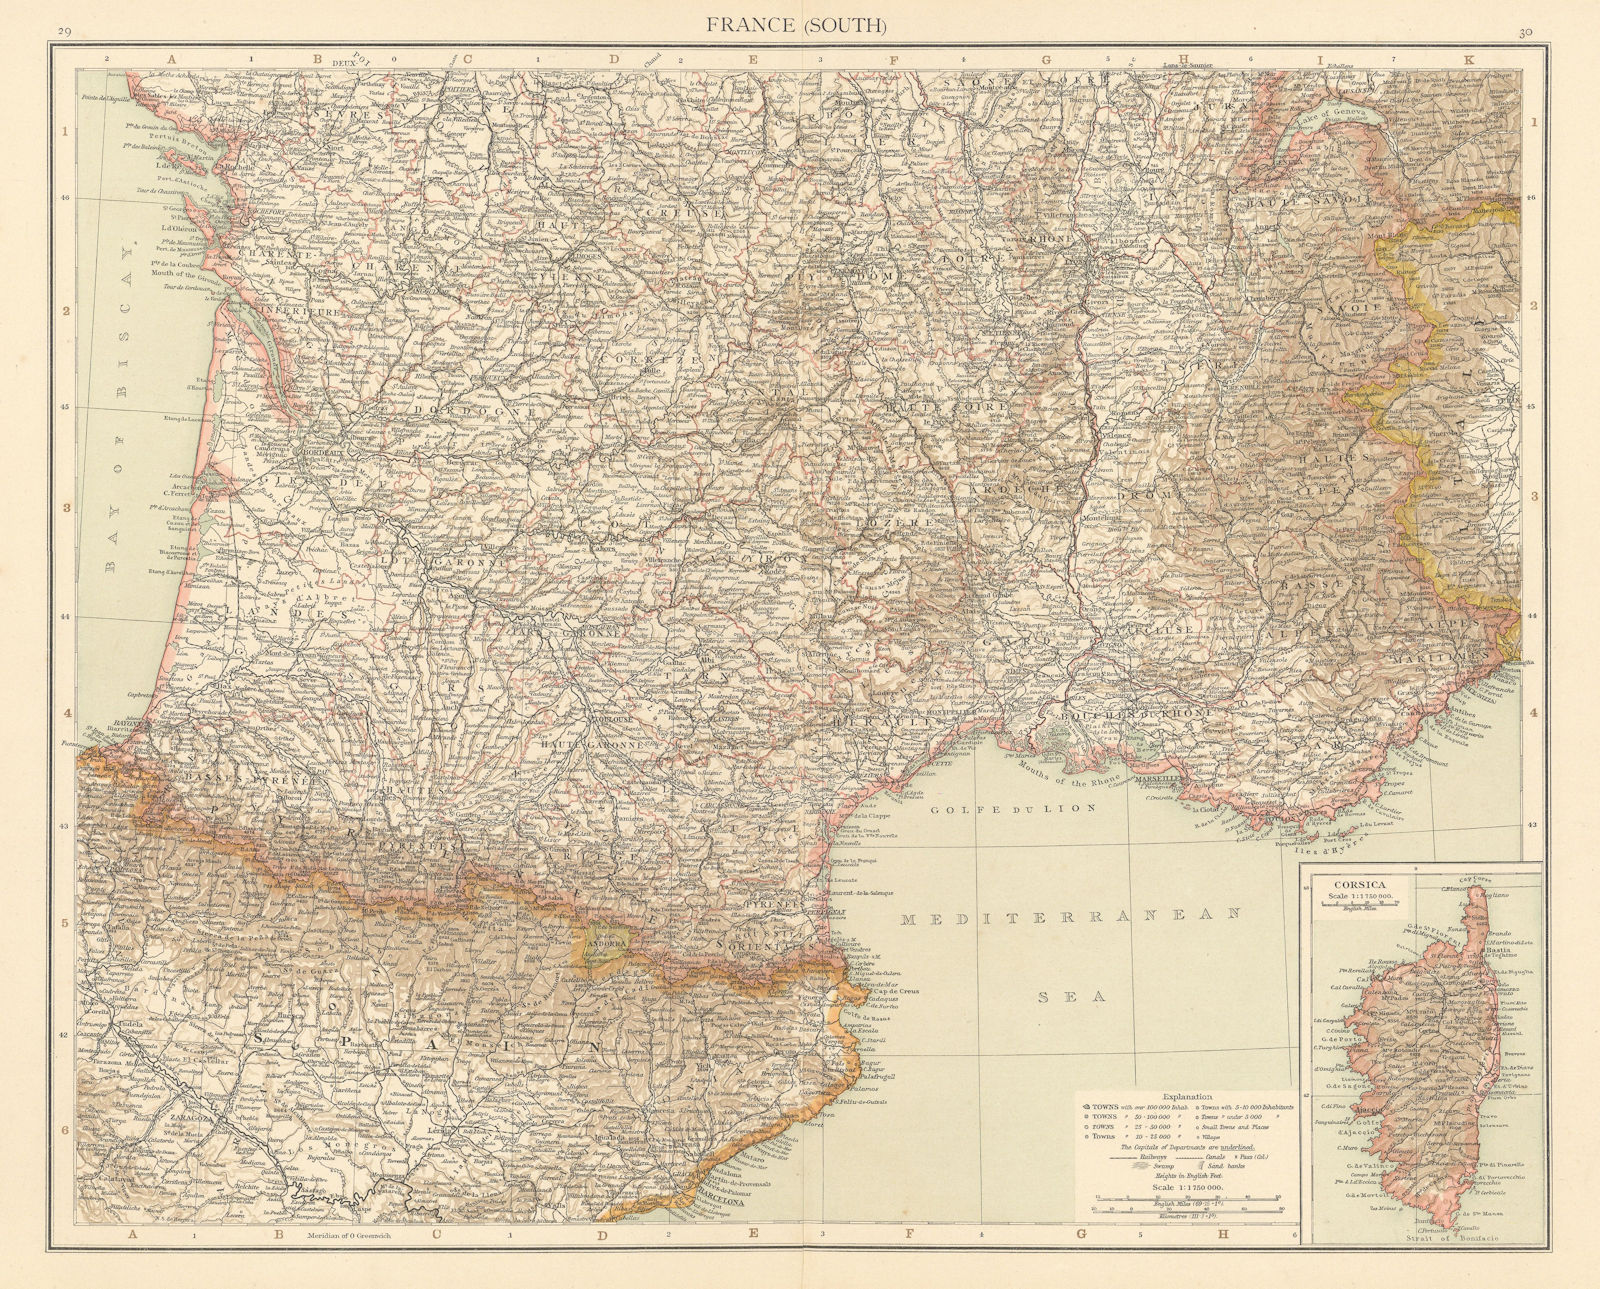 France (South). THE TIMES 1895 old antique vintage map plan chart